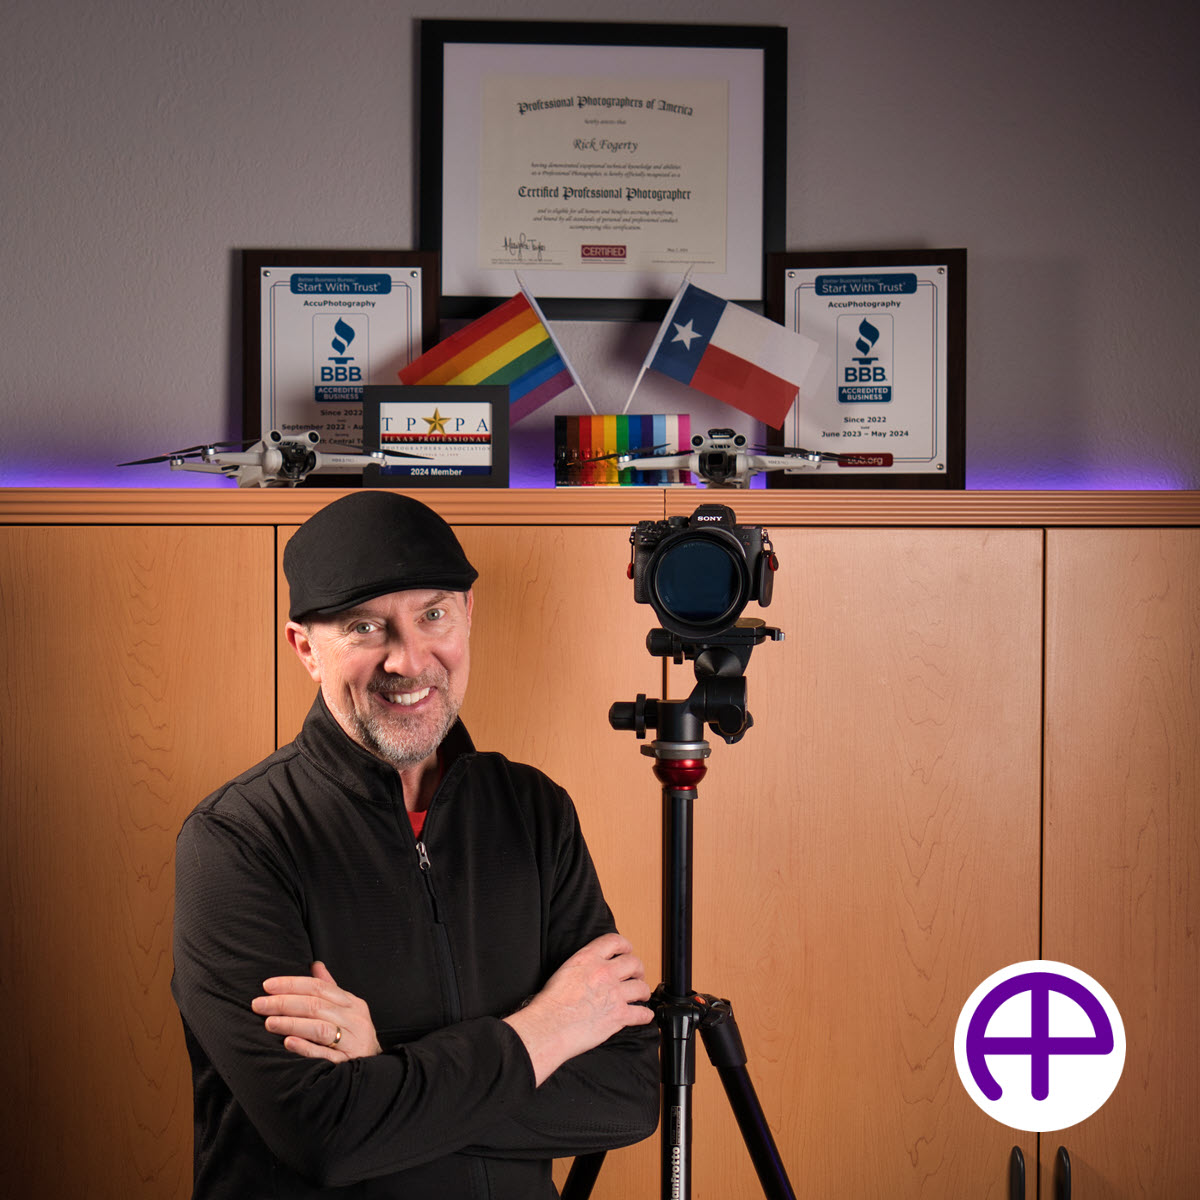 Rick fogerty, certified professional photographer, standing next to sony camera, framed certified professional photographer certificate, bbb plaques, tppa member card, and two dji mini 3 pro drones, with accuphotography logo in the image.